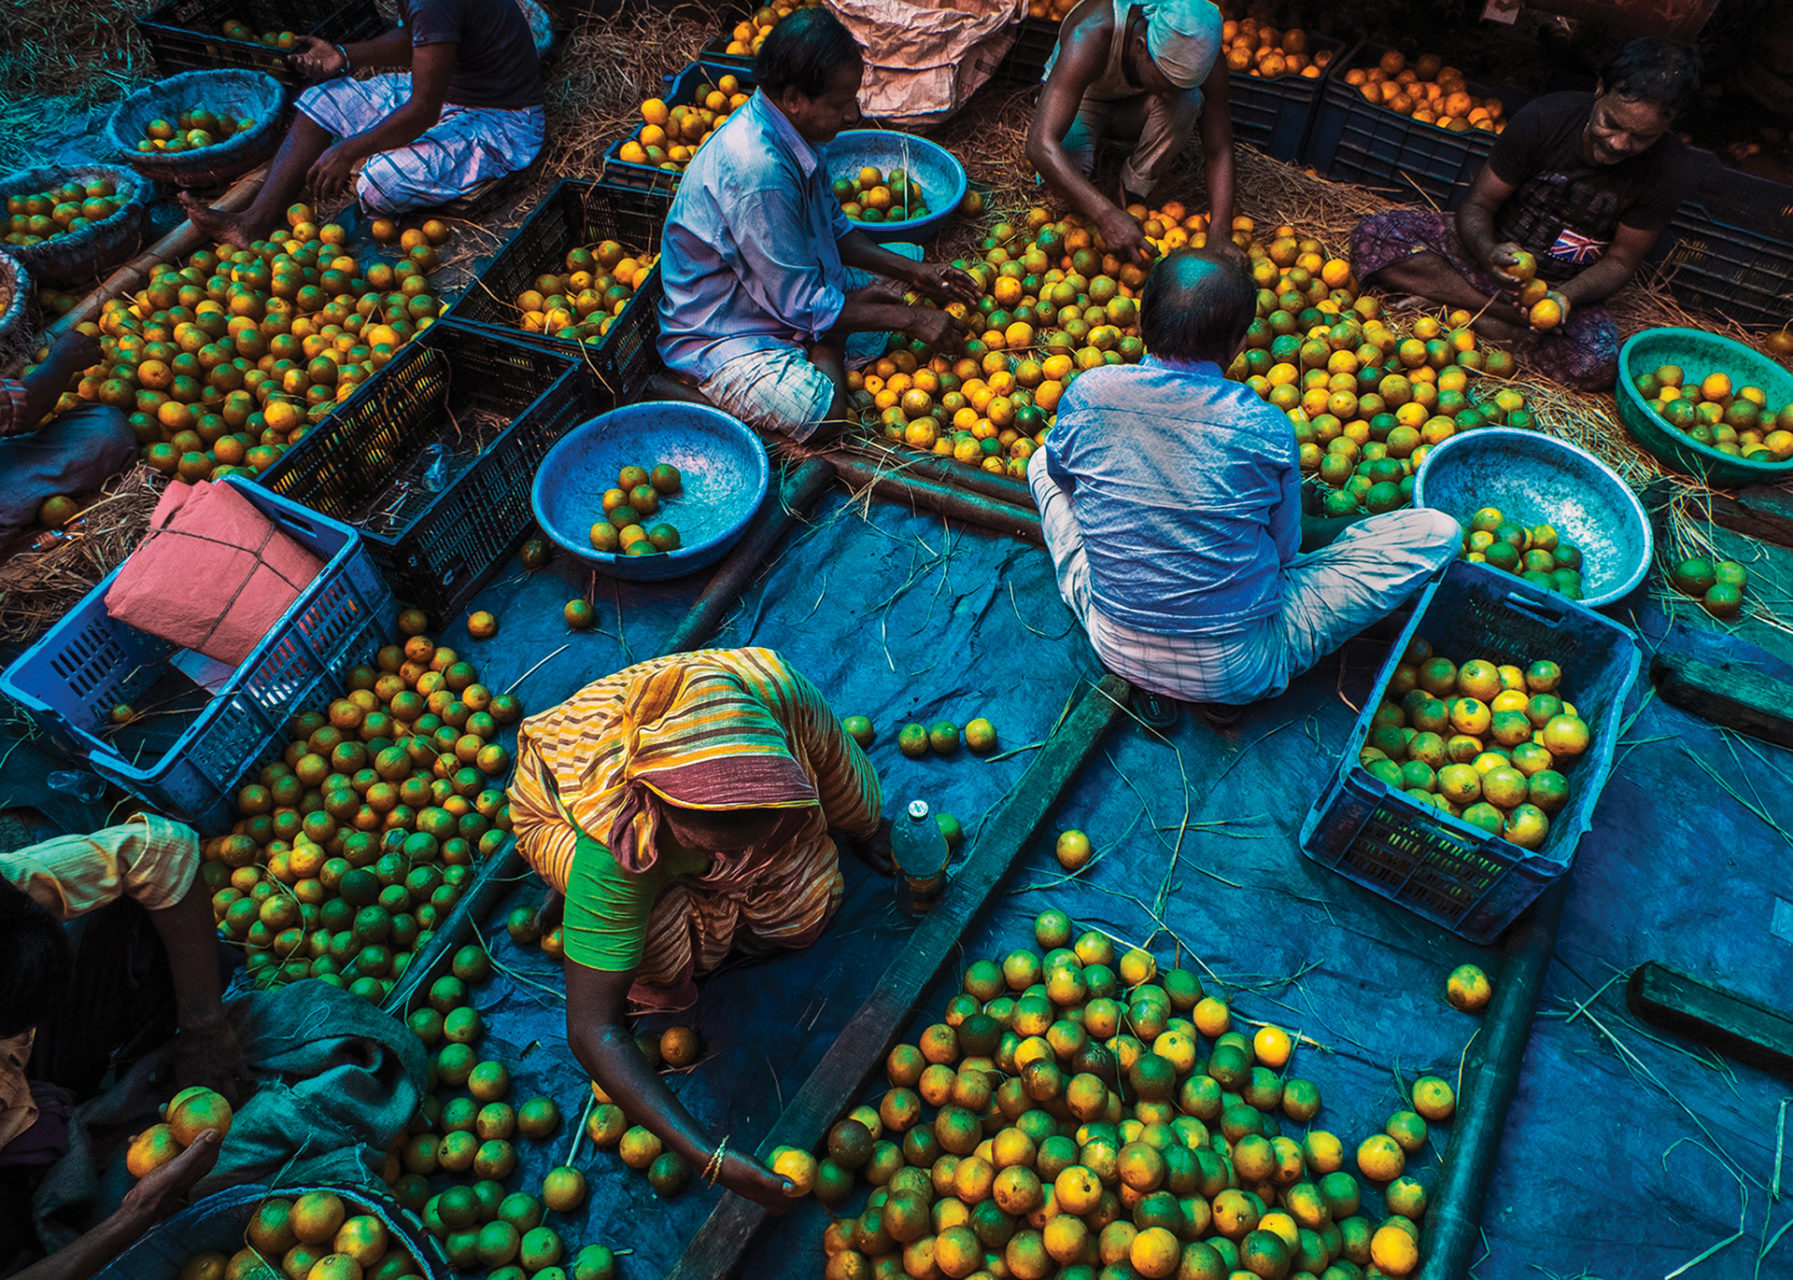 People sit on the ground sorting fruit